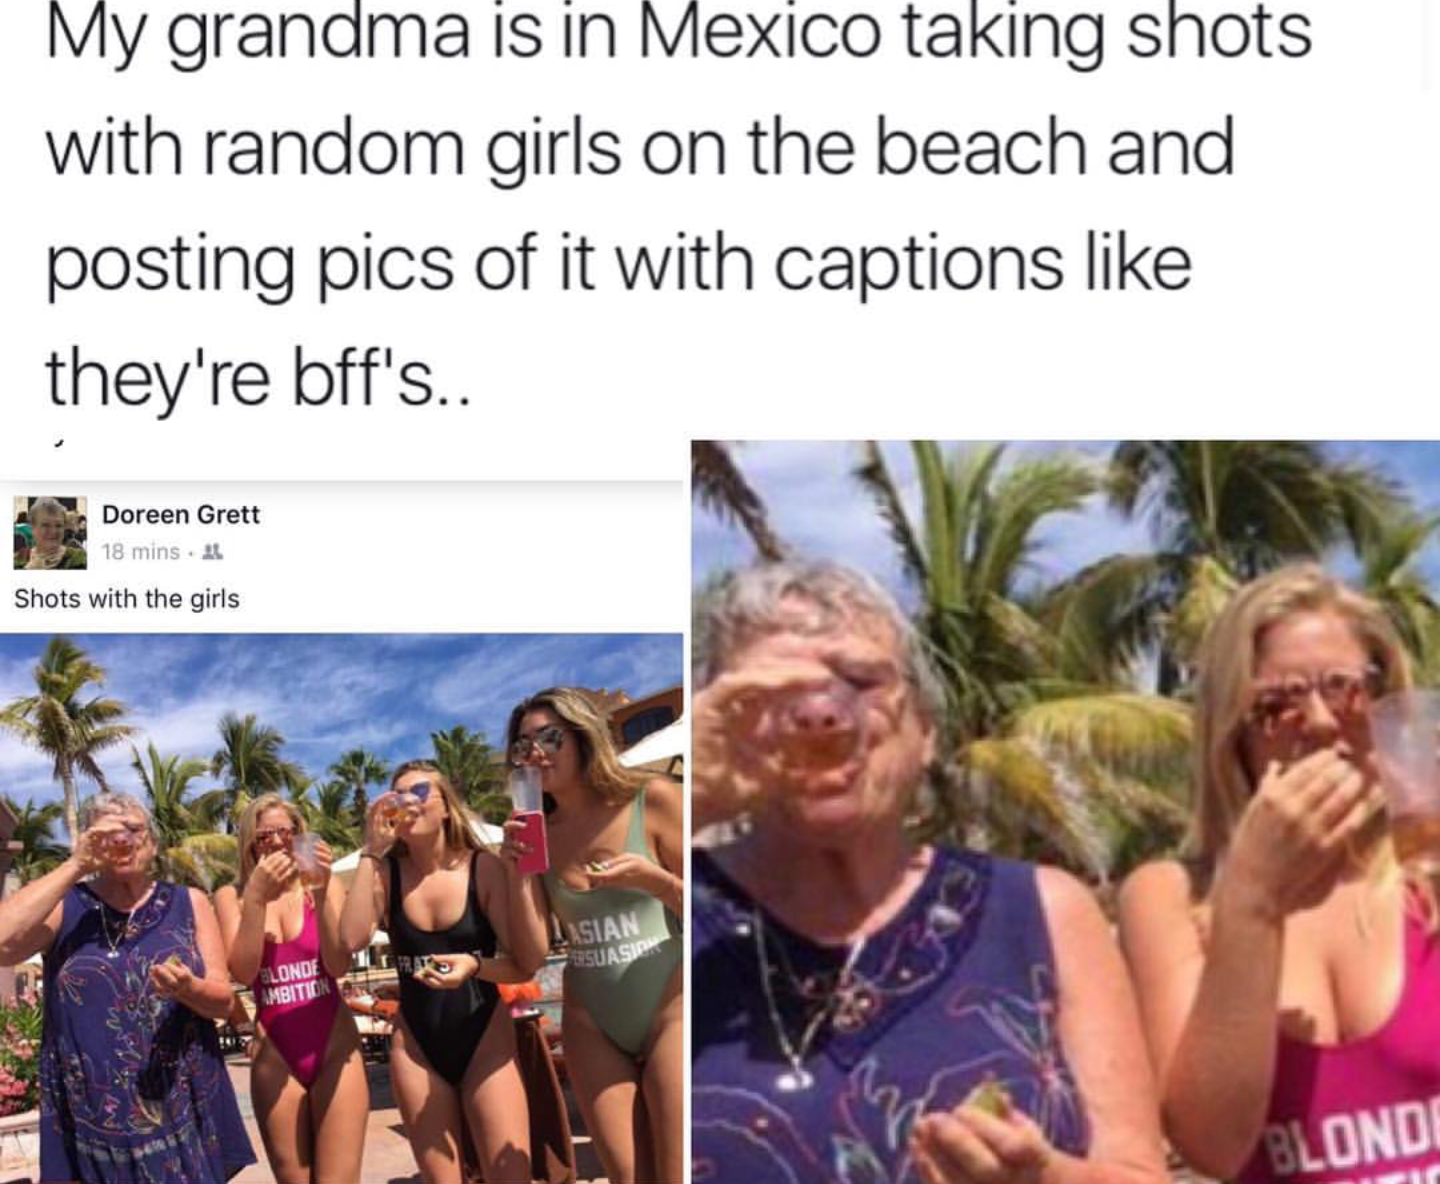 grandma taking shots - My grandma is in Mexico taking shots with random girls on the beach and posting pics of it with captions they're bff's.. Doreen Grett 18 mins. Shots with the girls Lisian Blondi